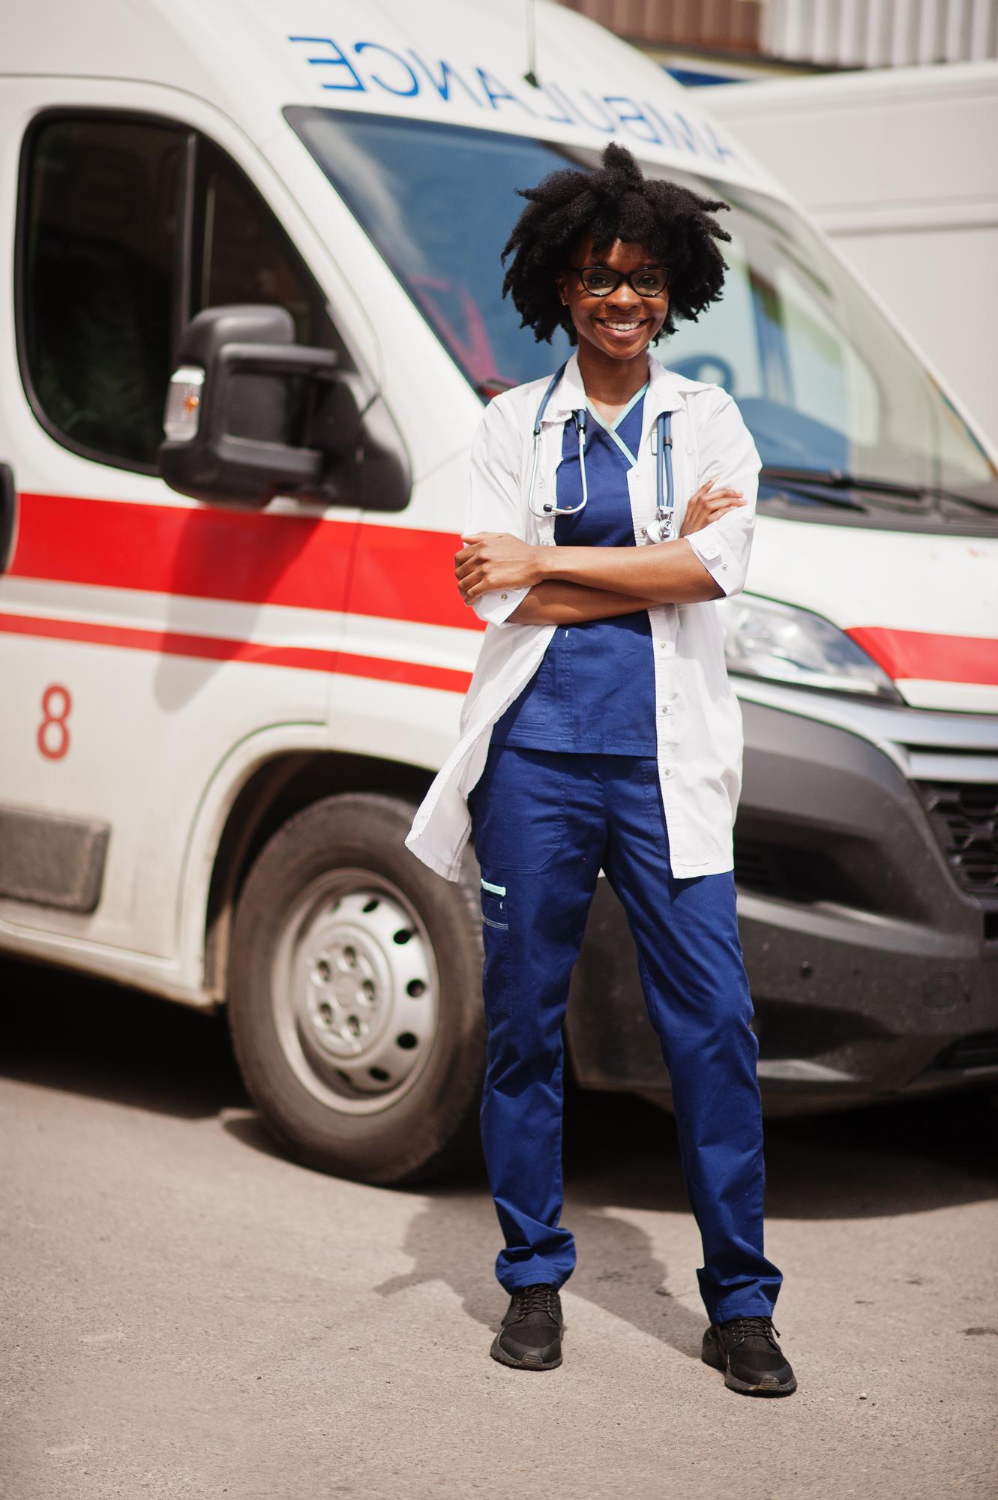 african-american-female-paramedic-standing-front-ambulance-car